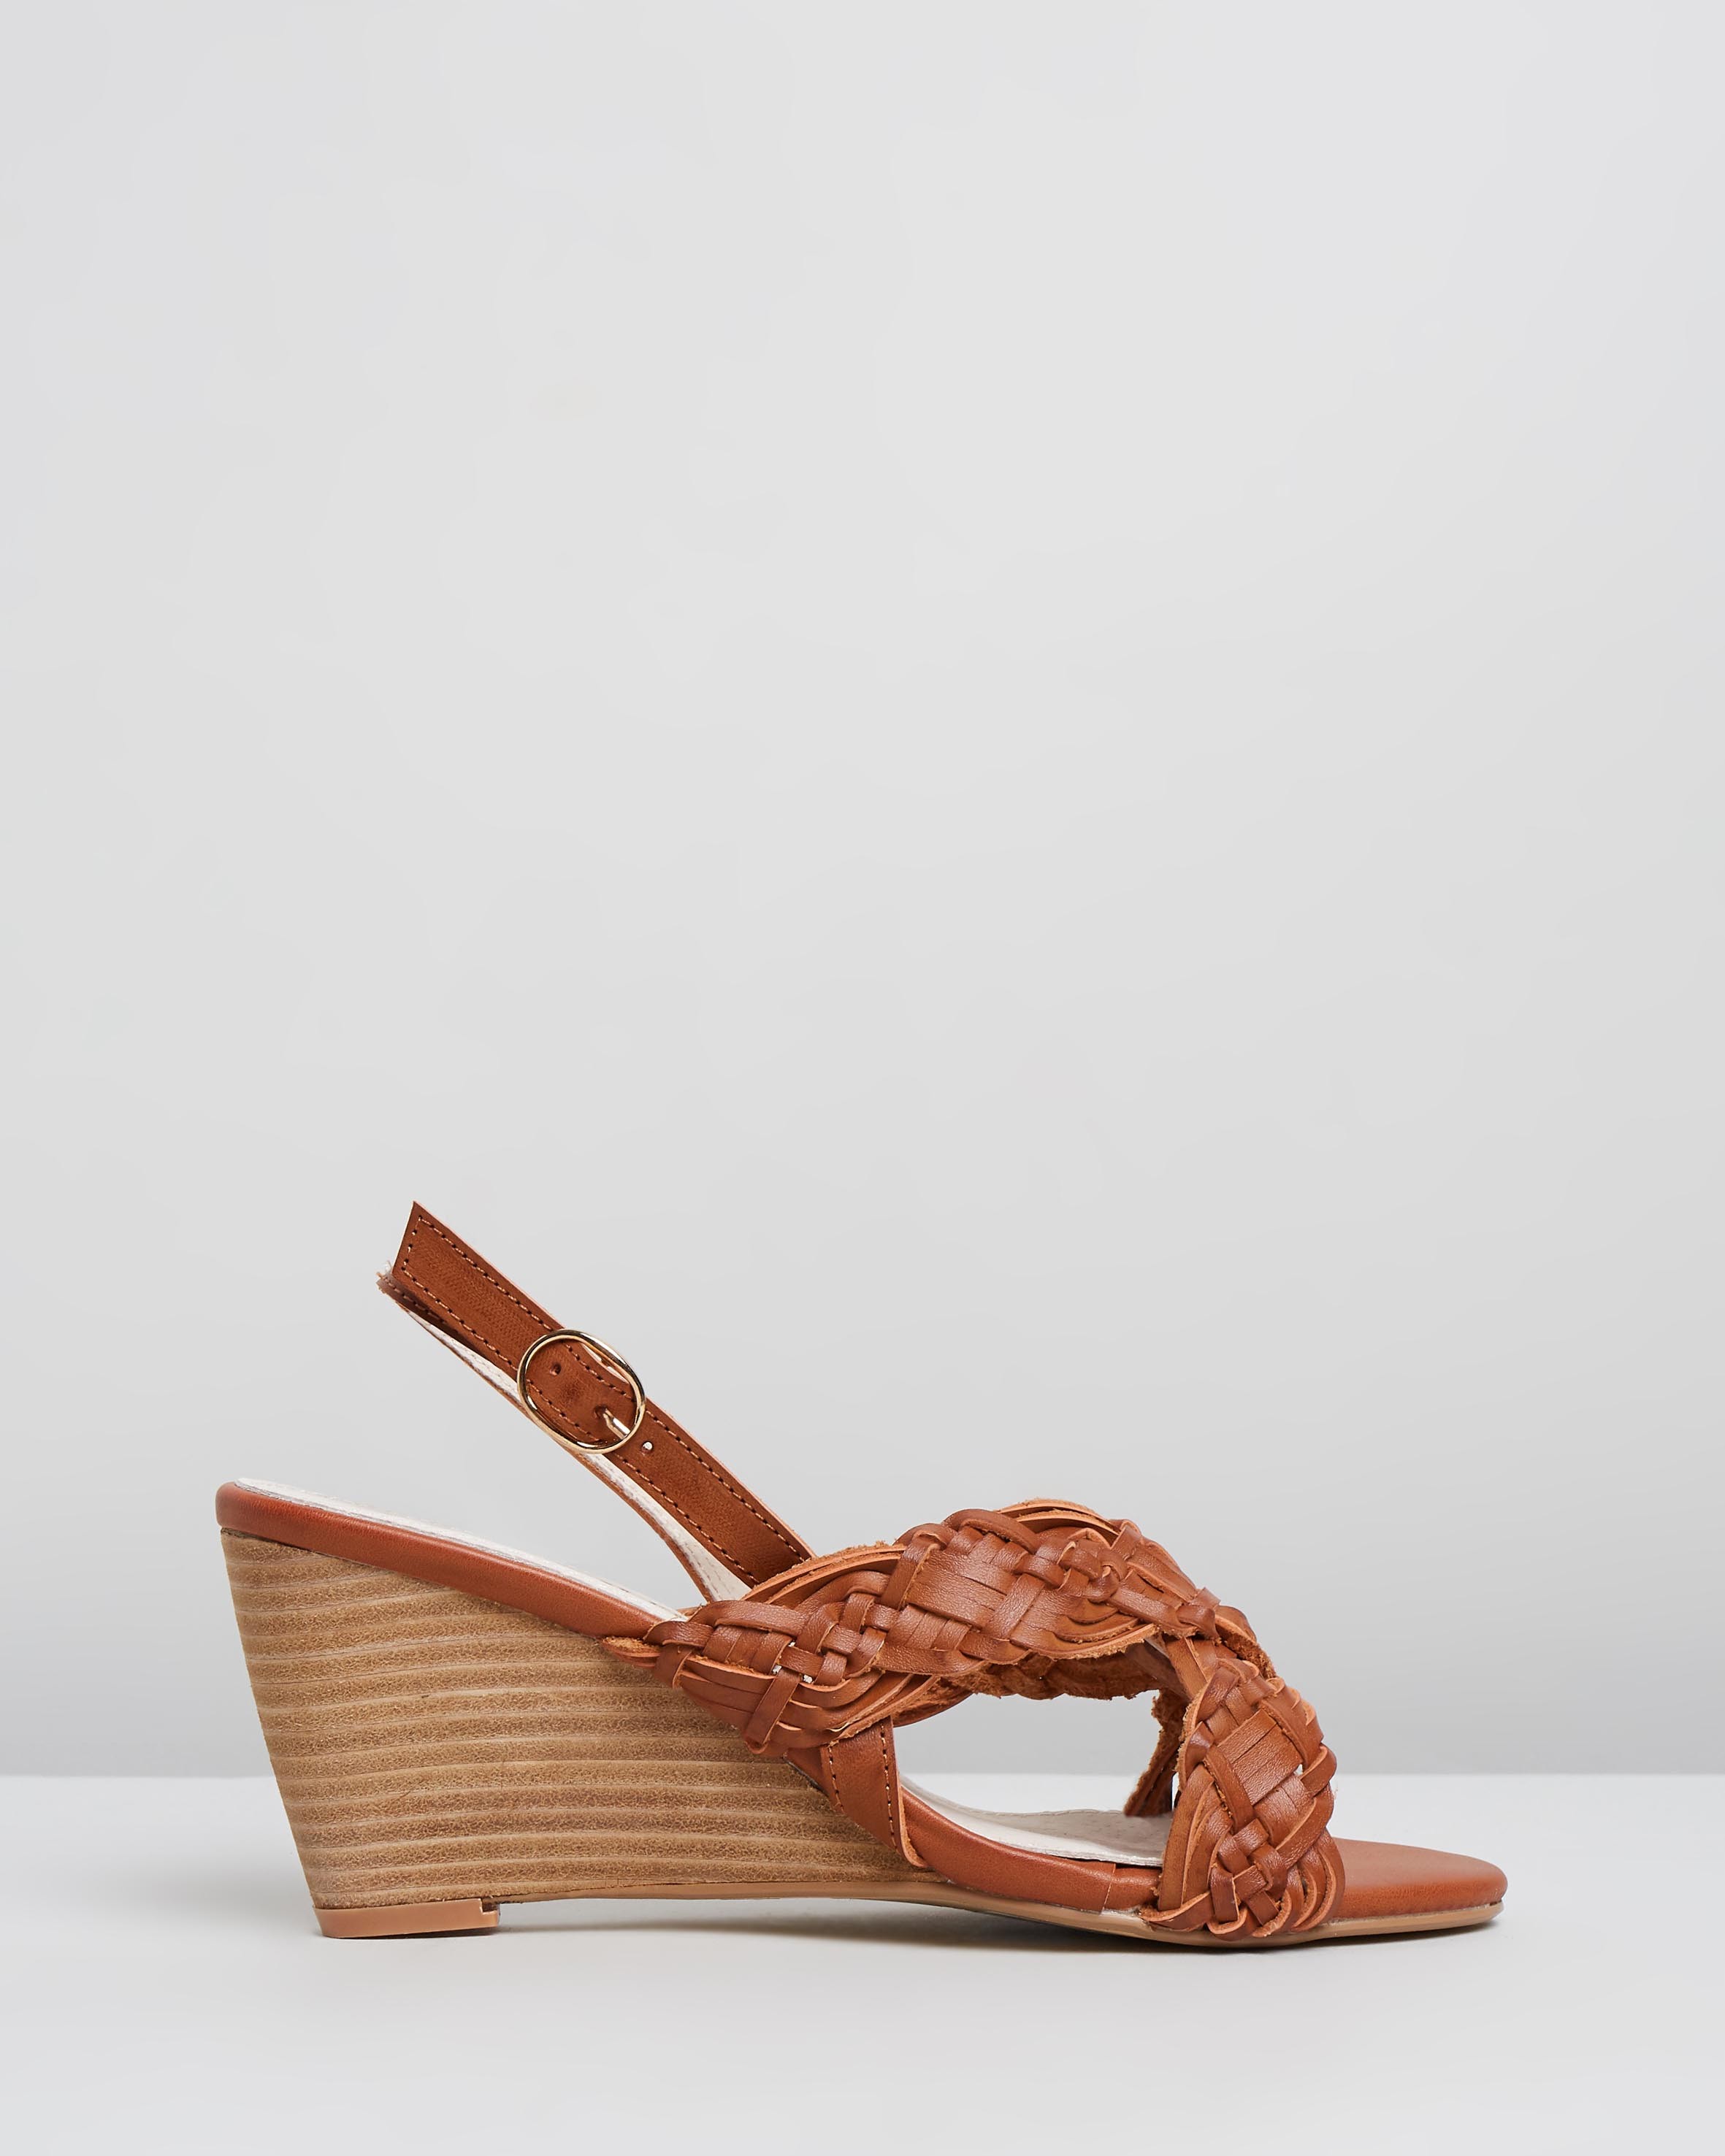 Alice Wedges Tan by Walnut Melbourne | ShoeSales